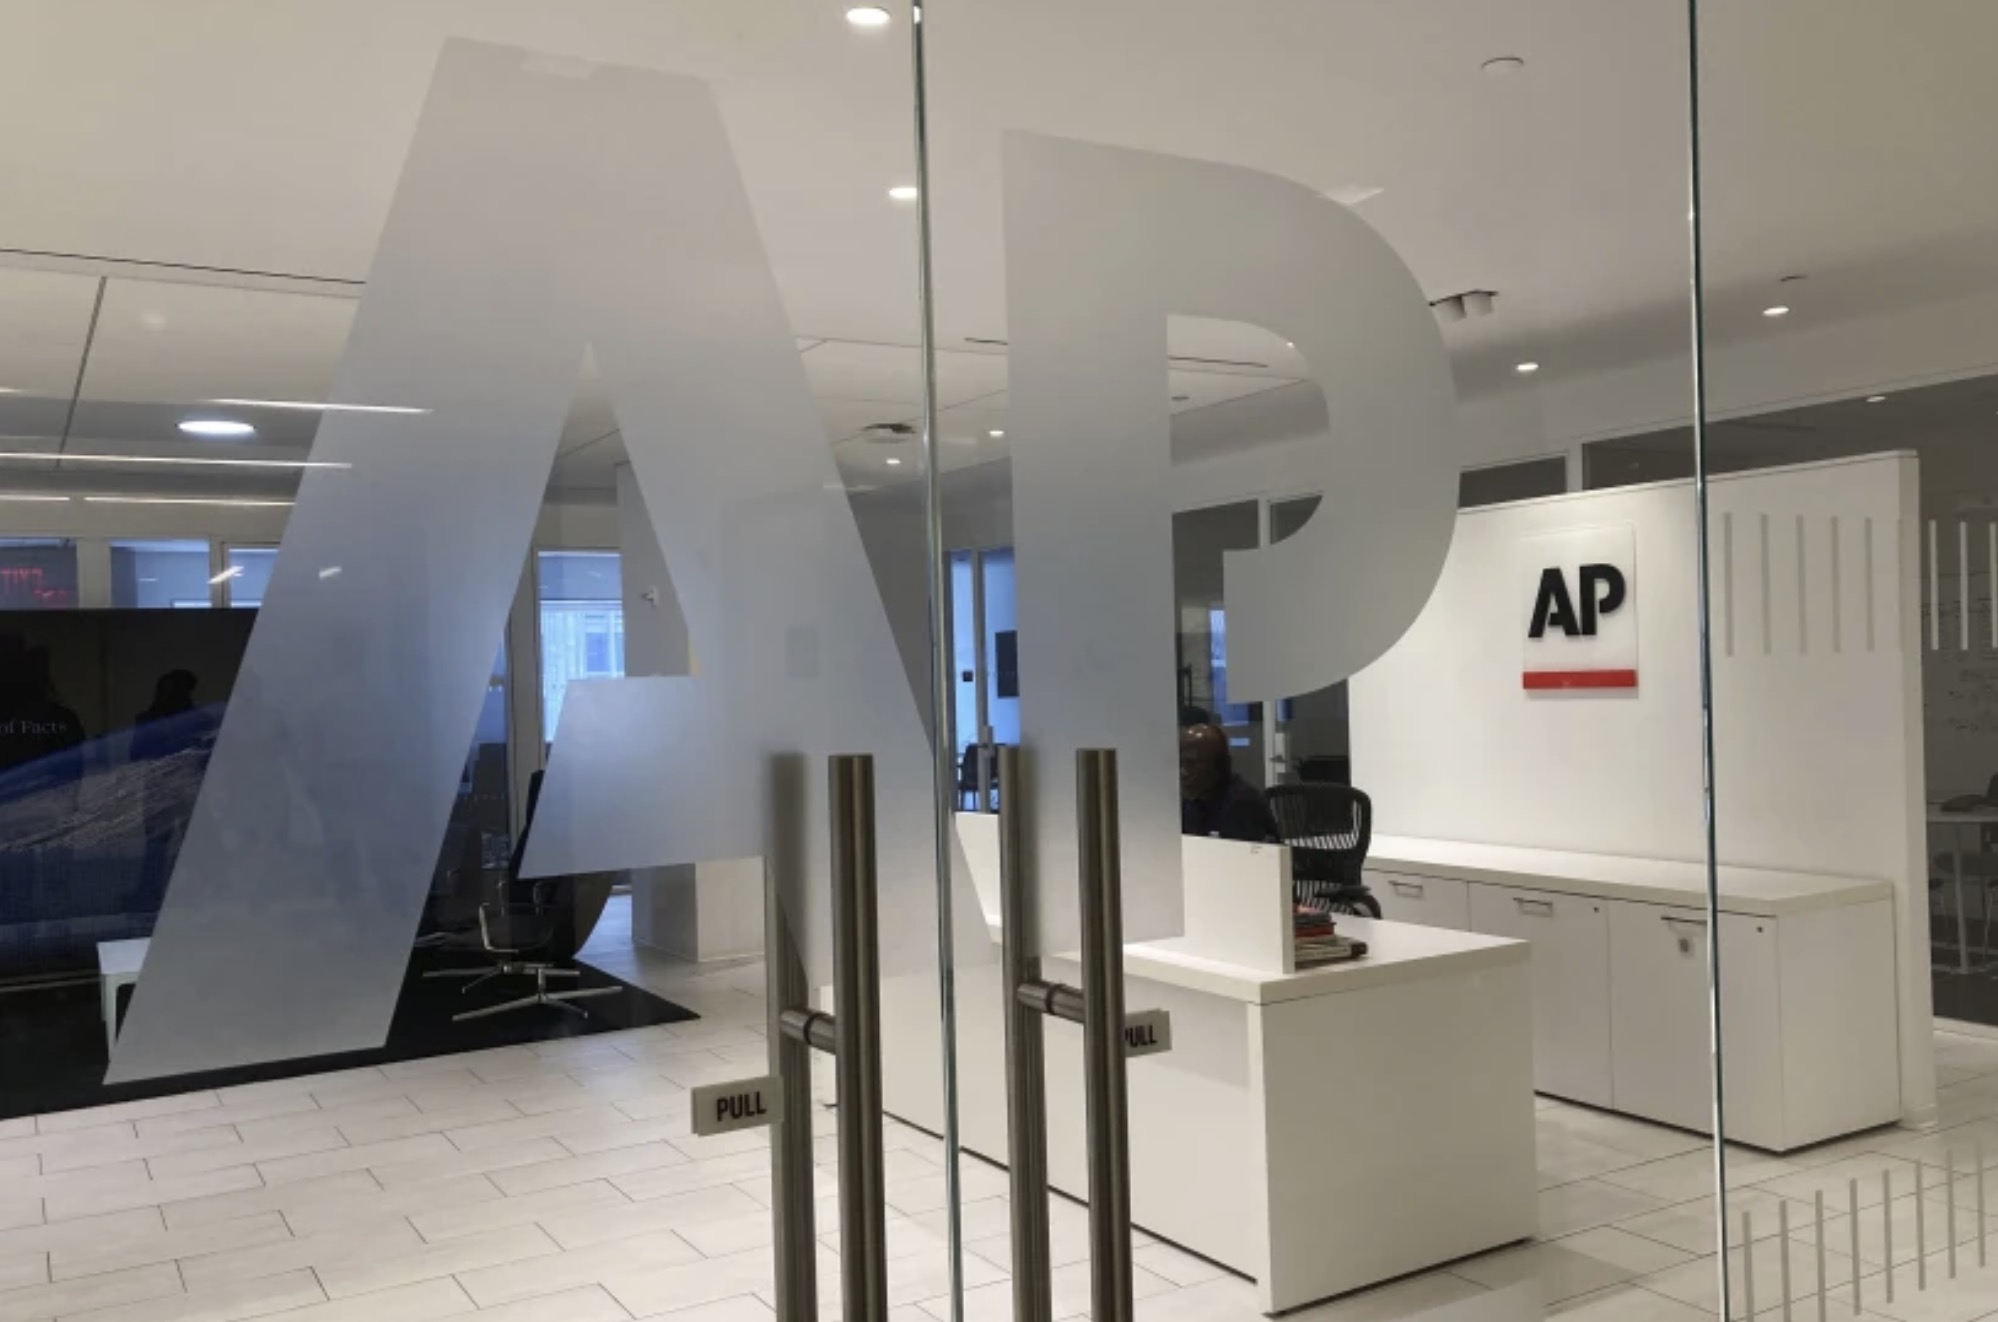 The Associated Press (AP) logo is shown at the entrance to the news organization's office in New York, U.S., July 13, 2023. /AP